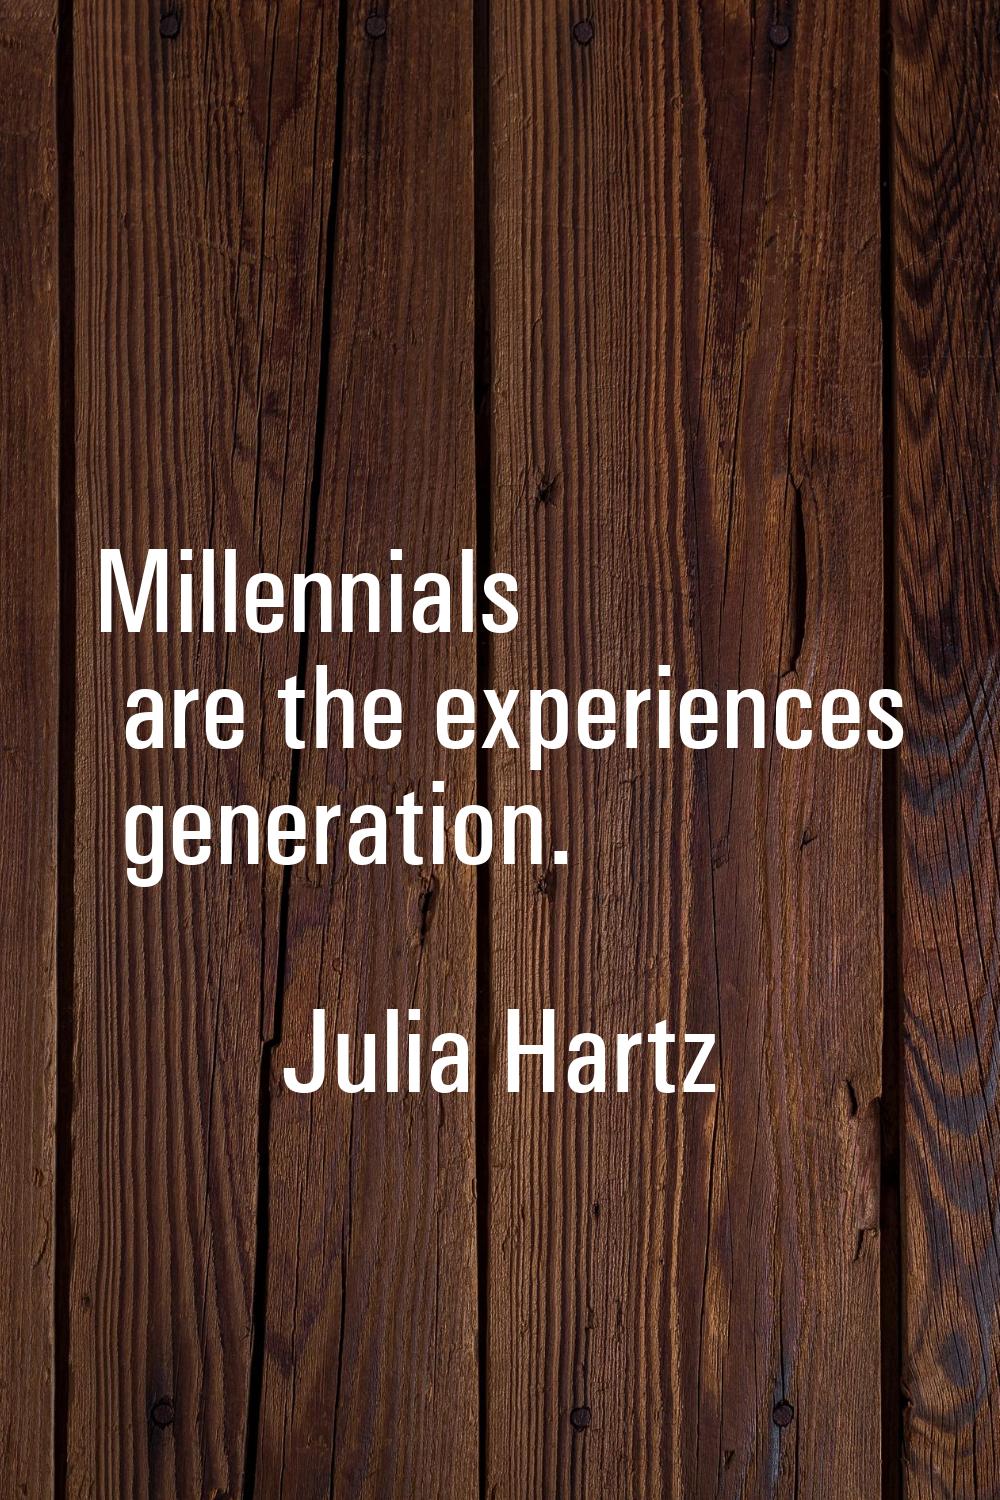 Millennials are the experiences generation.